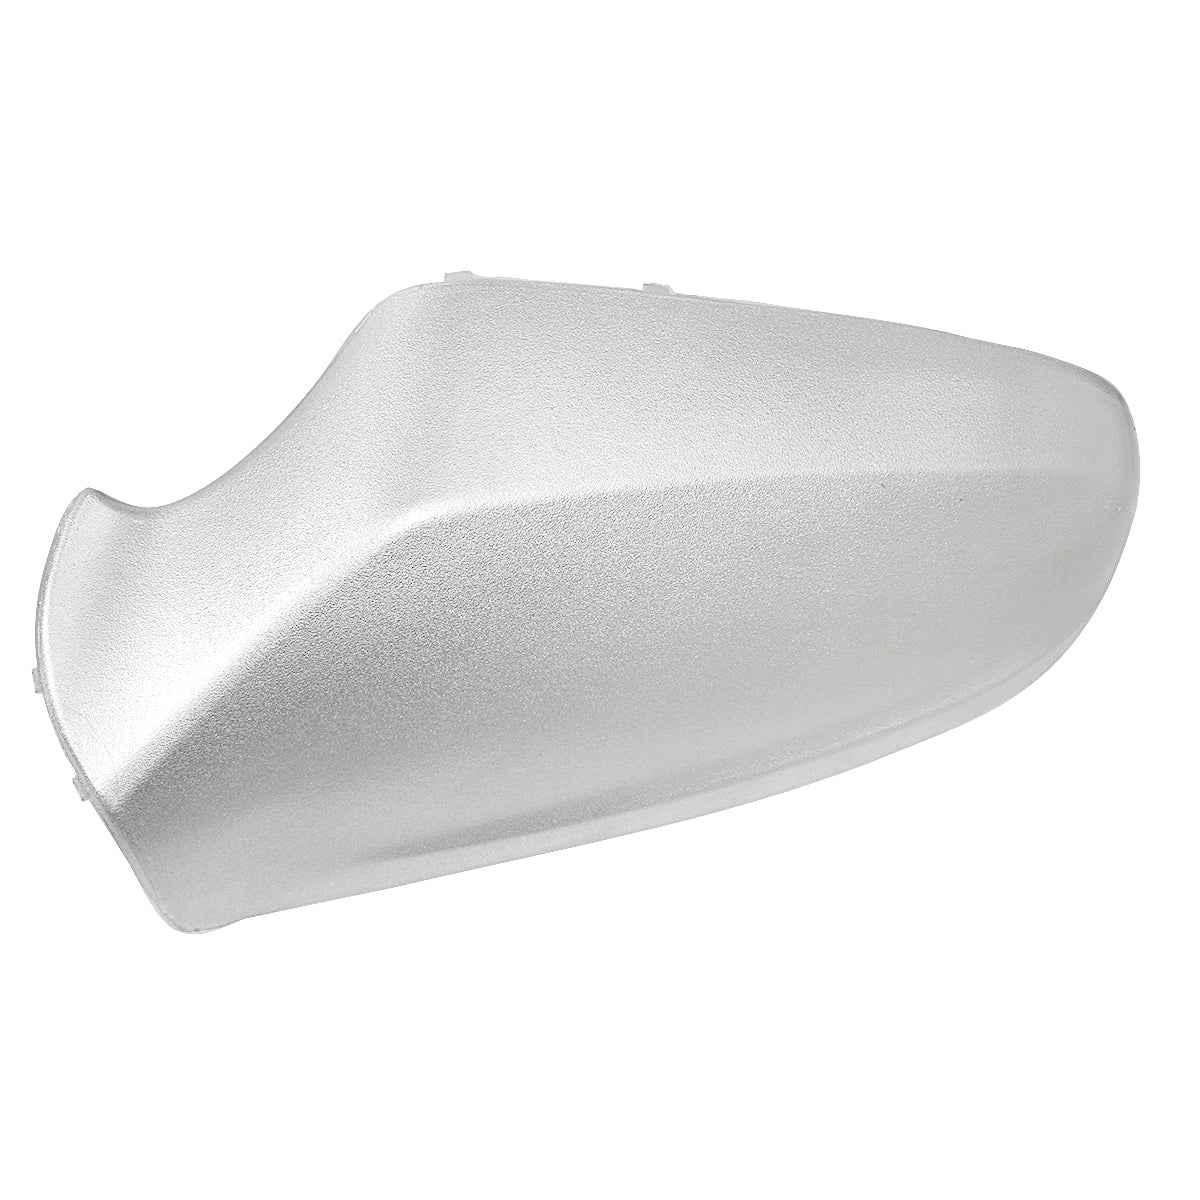 Left Door Wing Mirror Cover Silver N/S Passenger For Vauxhall Astra H MK5 2005-2009 - Auto GoShop